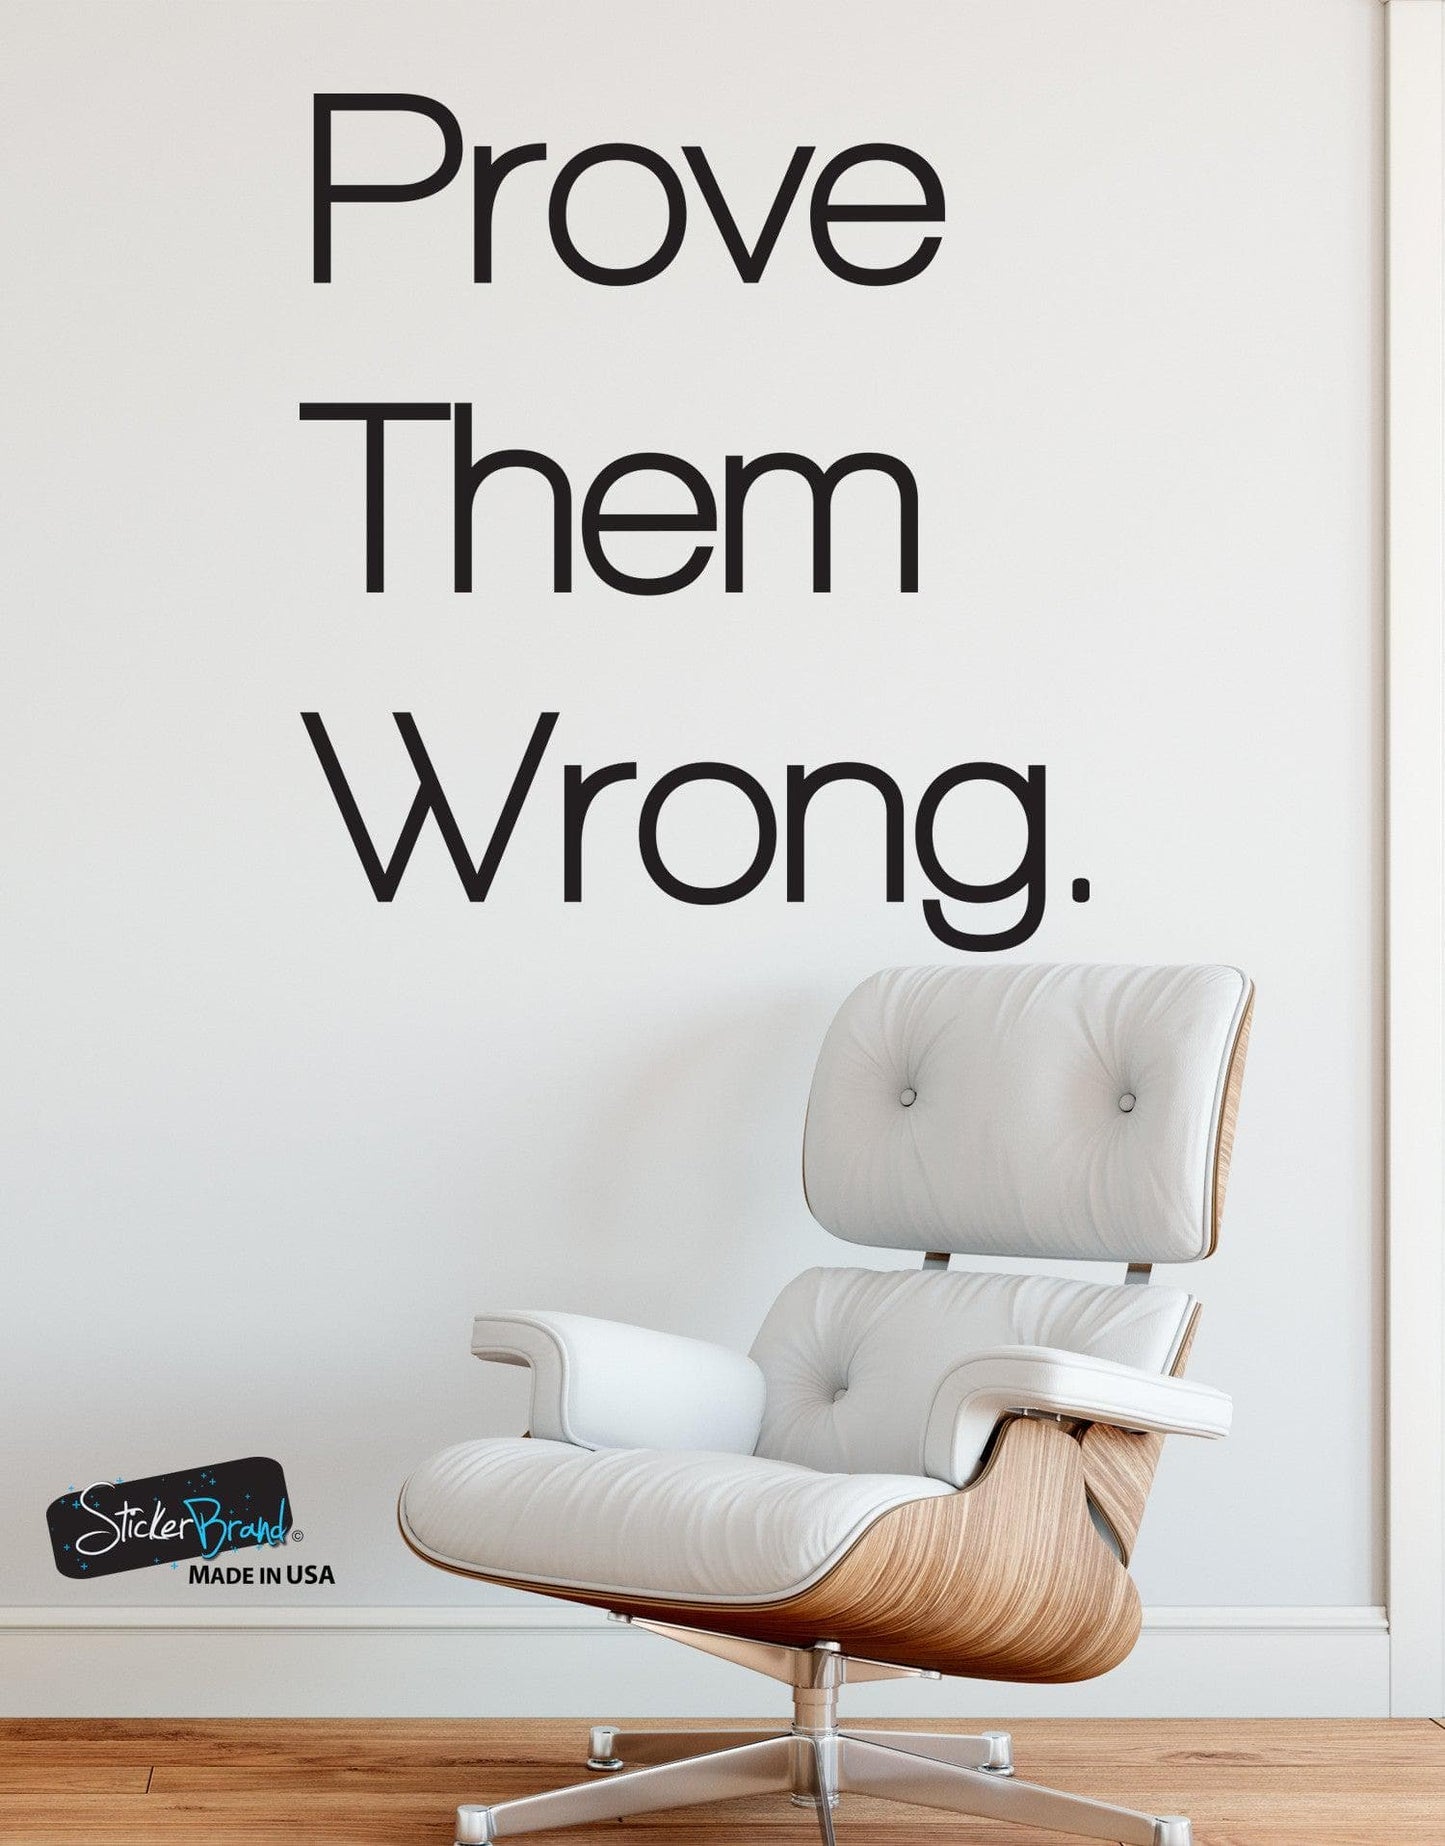 Prove Them Wrong Motivational Quote Vinyl Wall Decal Sticker #6072